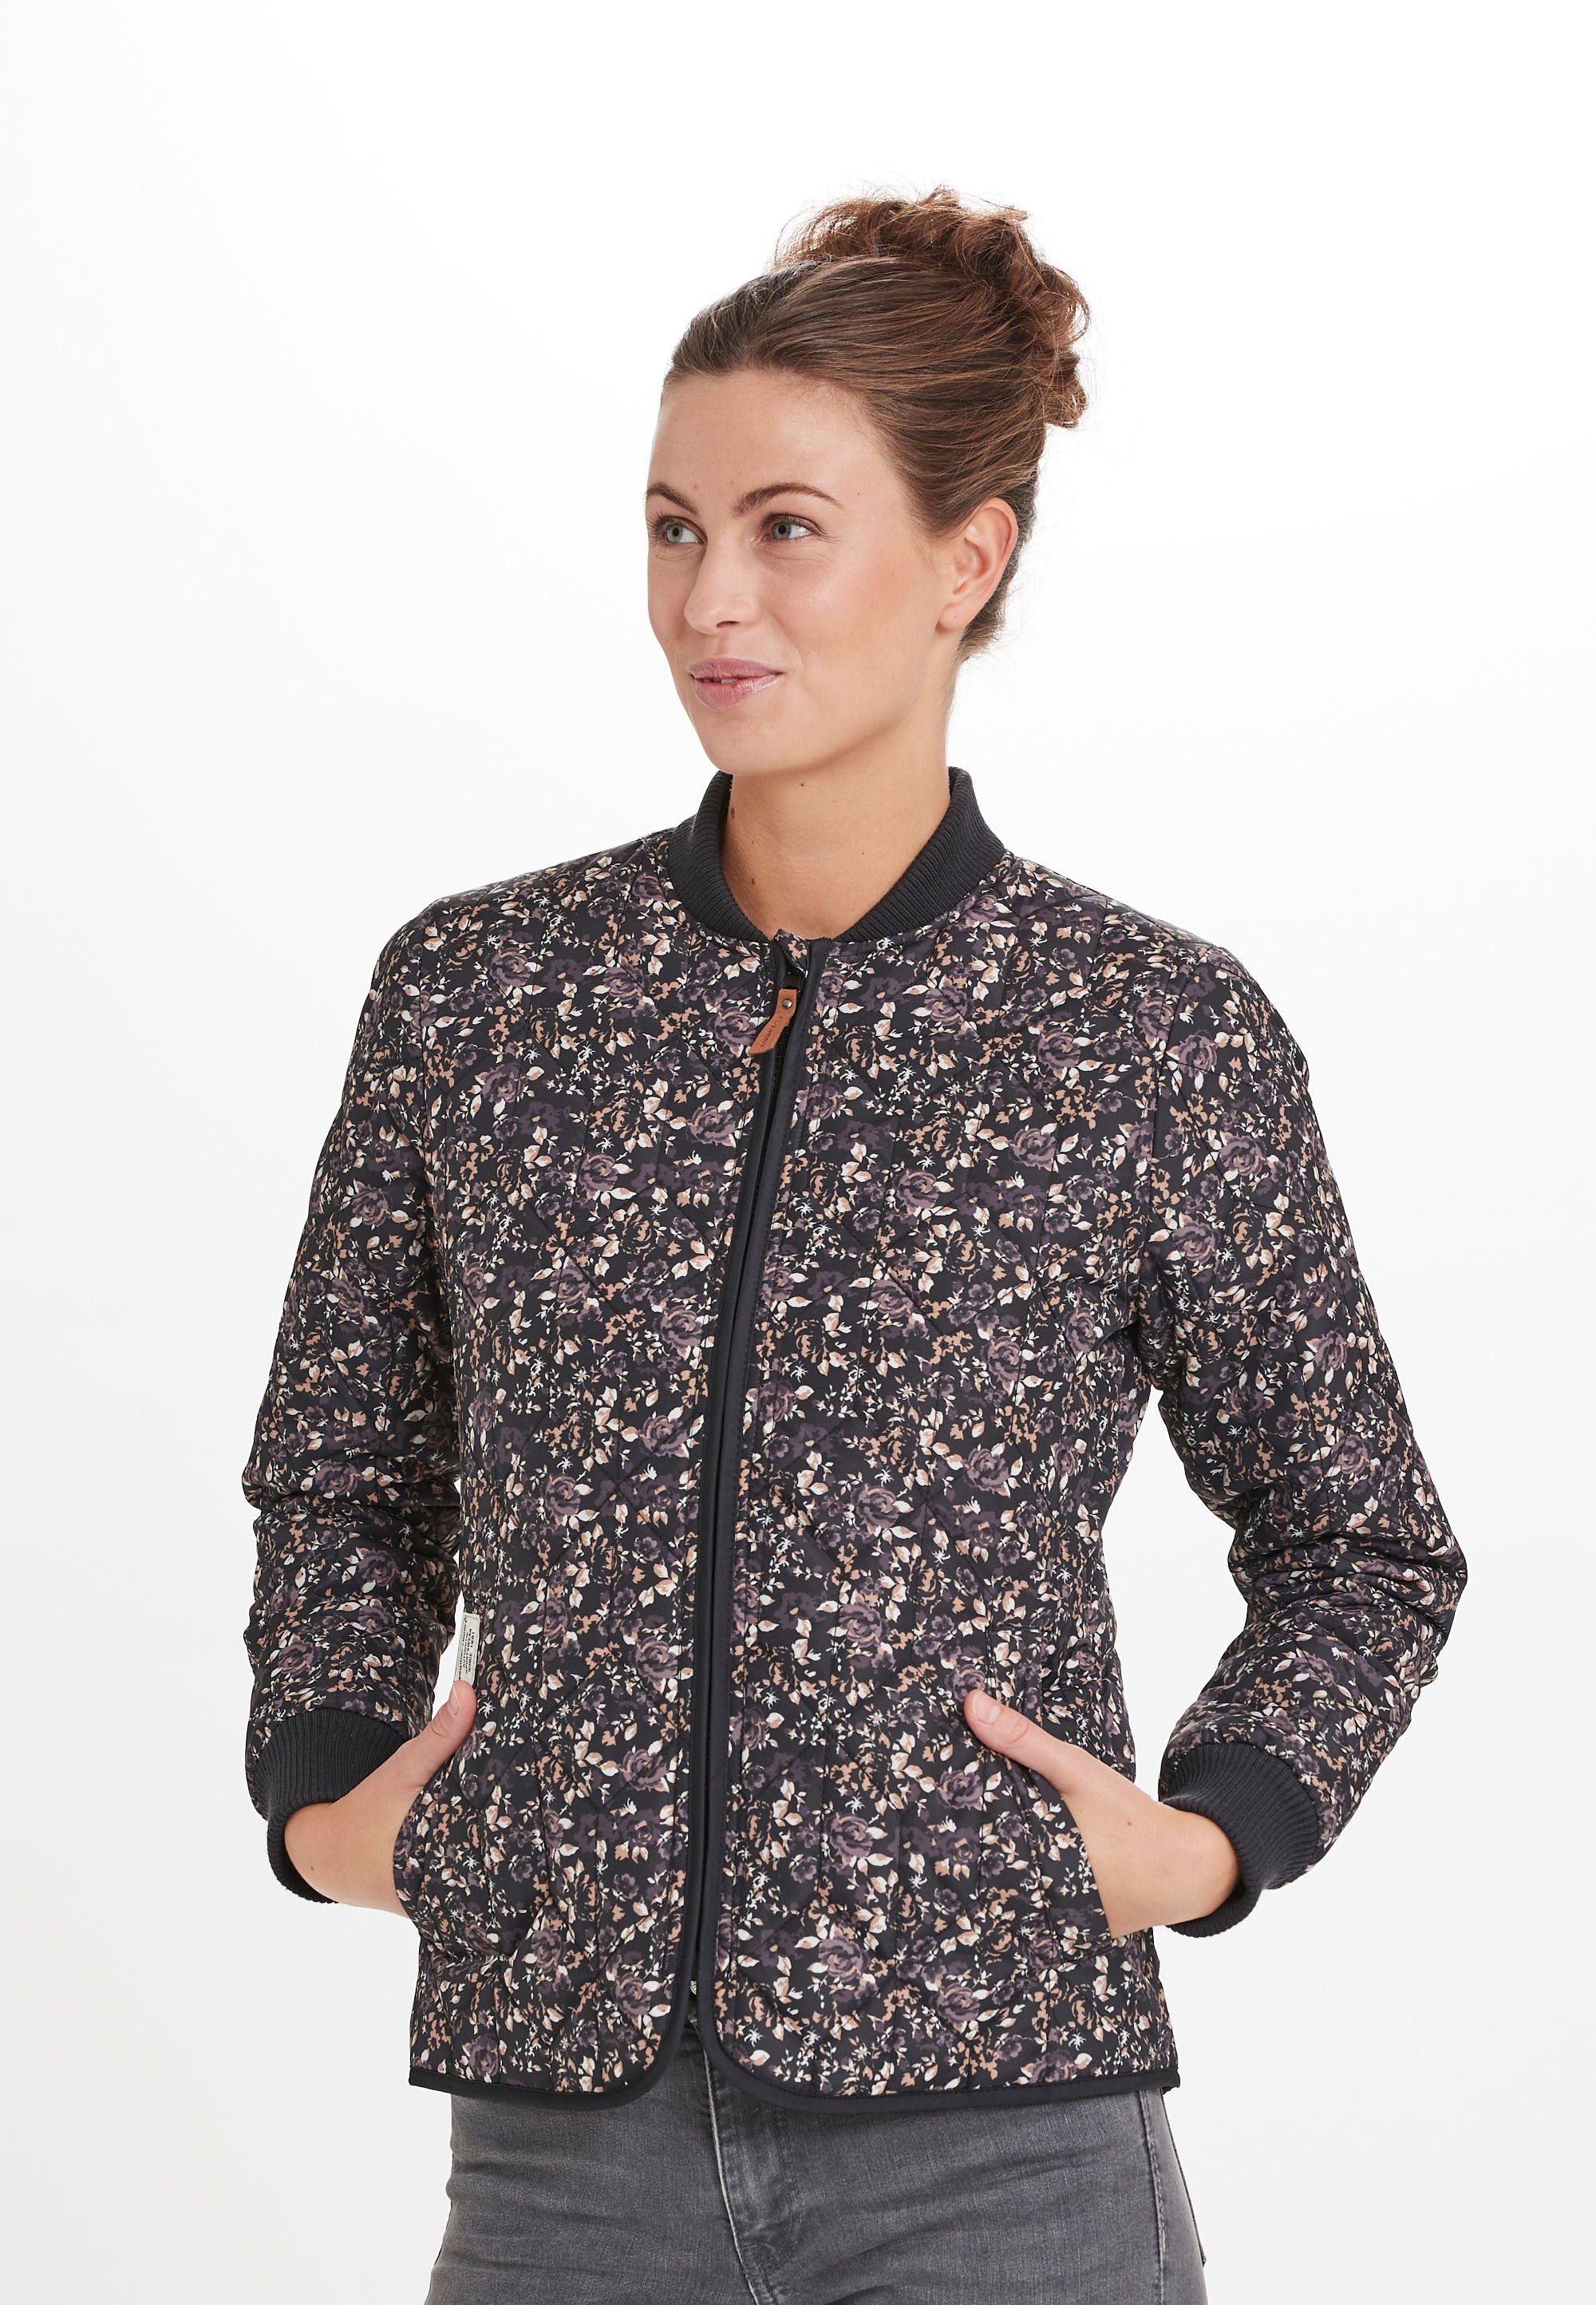 WEATHER online floralem »Floral«, Outdoorjacke Allover-Muster mit REPORT